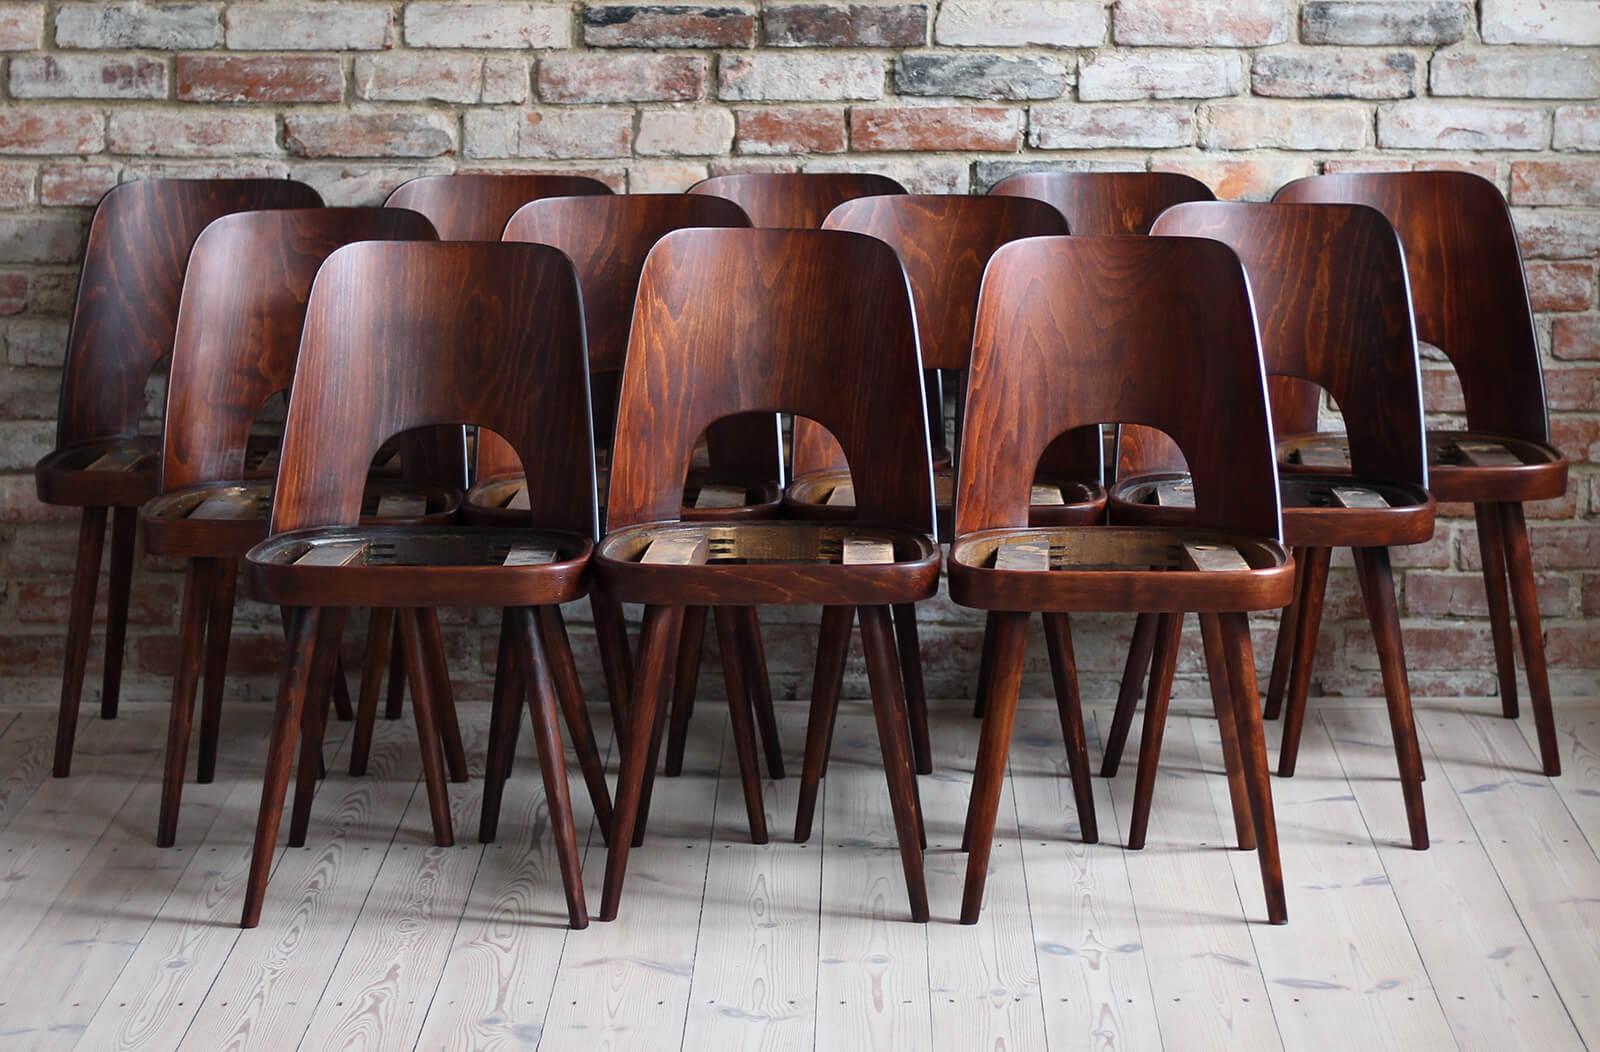 This set of 12 vintage dining chairs was designed by Oswald Haerdtl in the 1950s, famous Austrian designer - together with Mr. Josef Hoffmann he designed the cafe terrace at the Vienna Werkbund Exhibition of 1930, where they designed every little